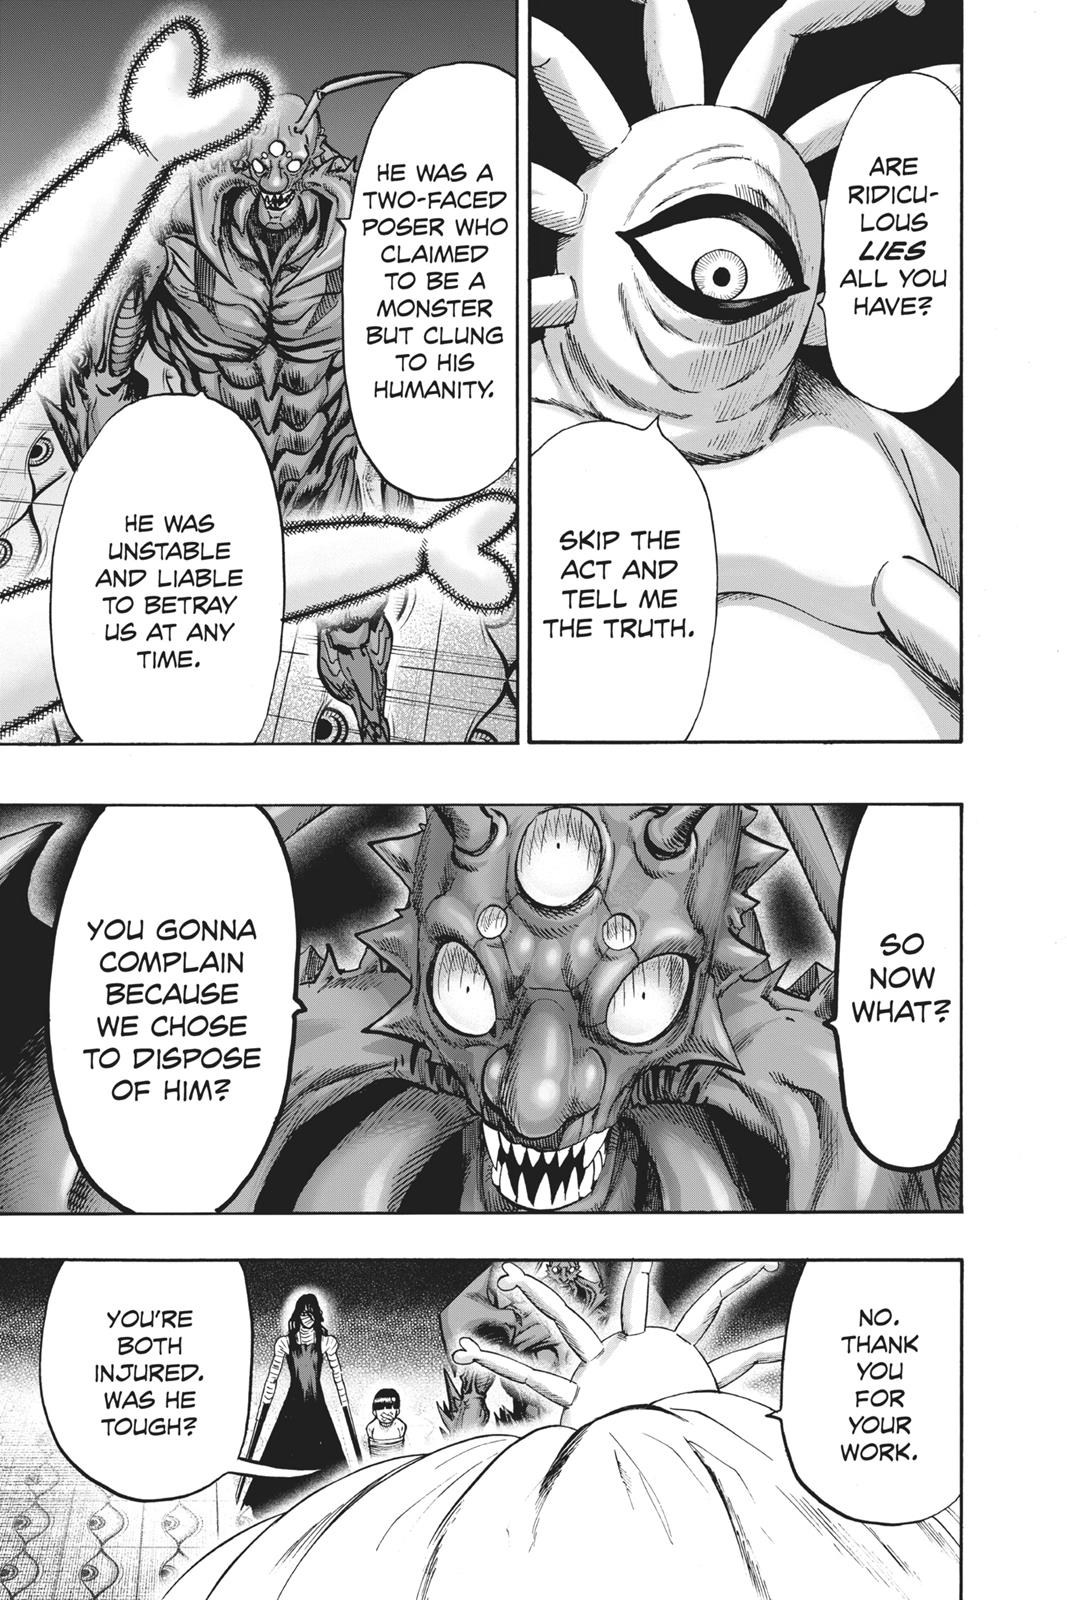 One-Punch Man, Punch 90 image 27